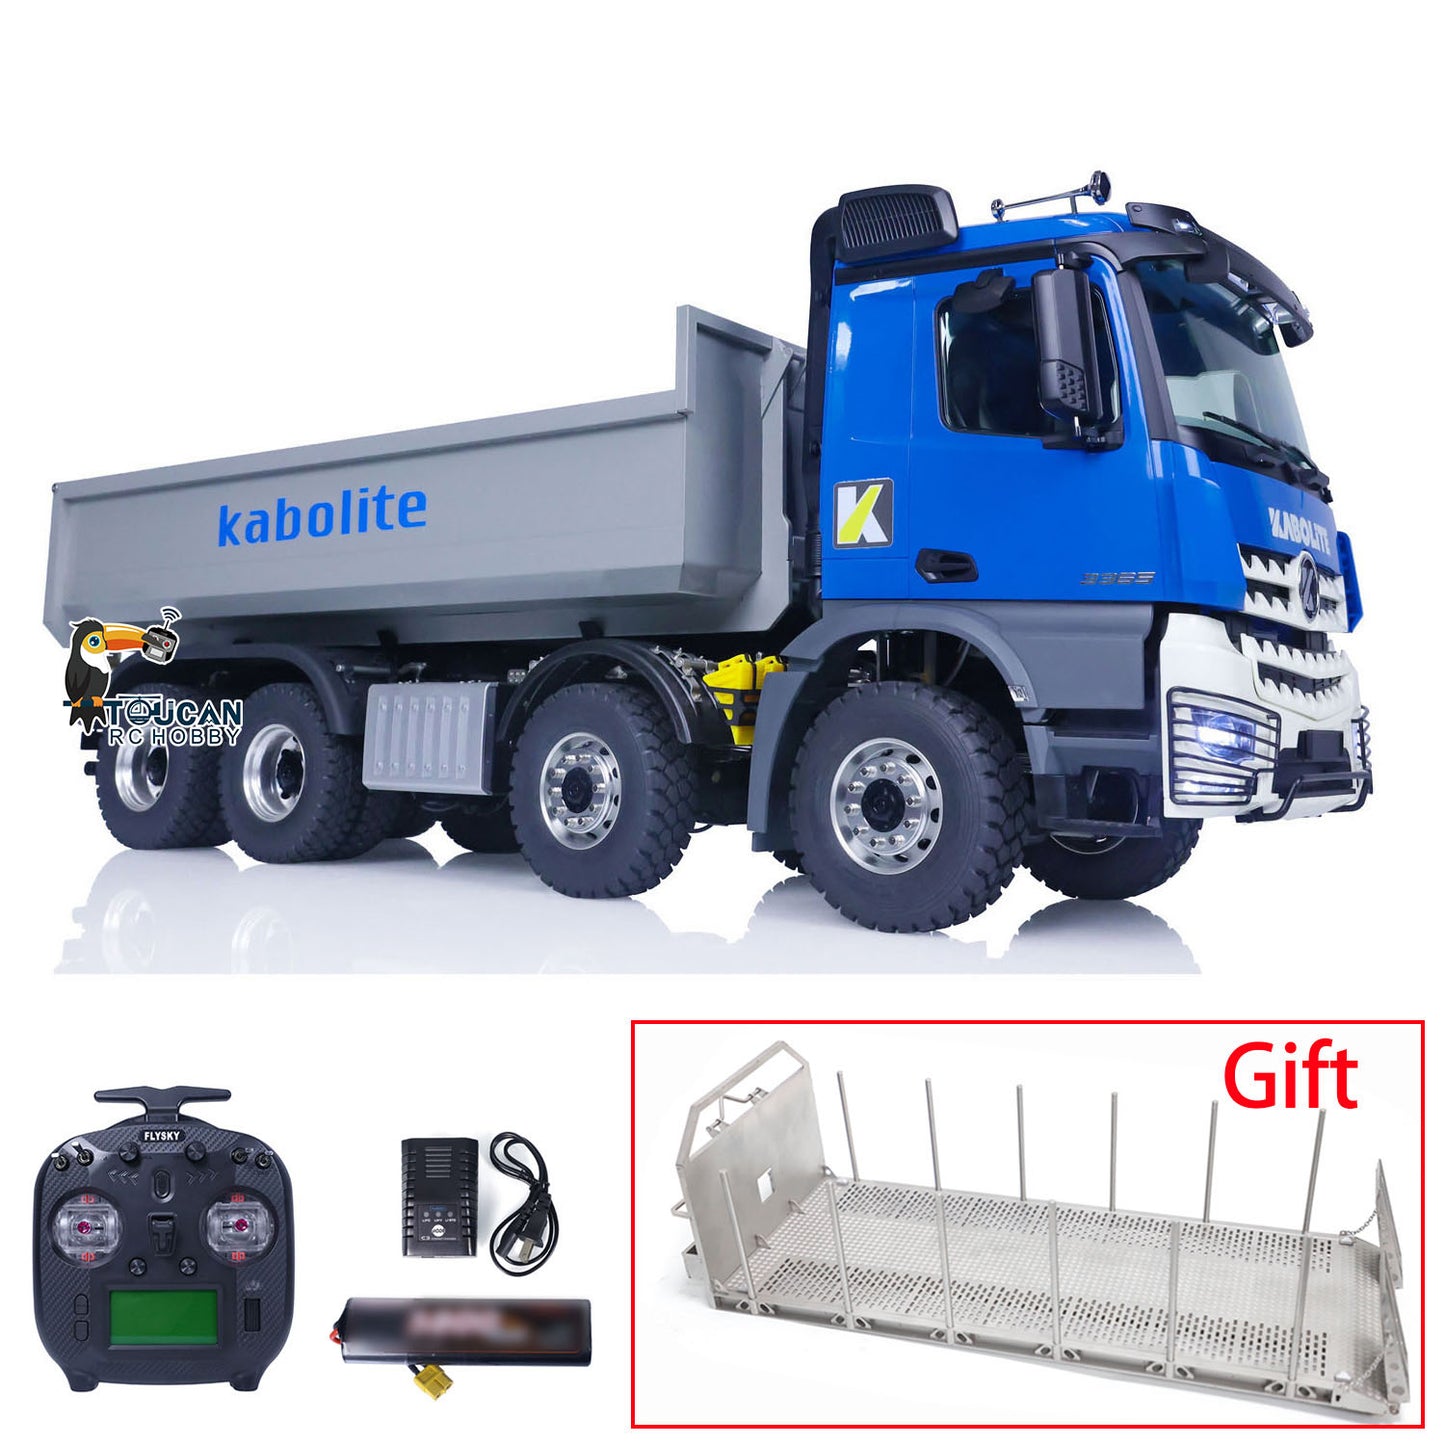 IN STOCK Kabolite 1/14 8X8 RC Hydraulic Equipment Radio Controlled Dumper Truck K3365 Metal RTR Tipper Cars Hobby Models